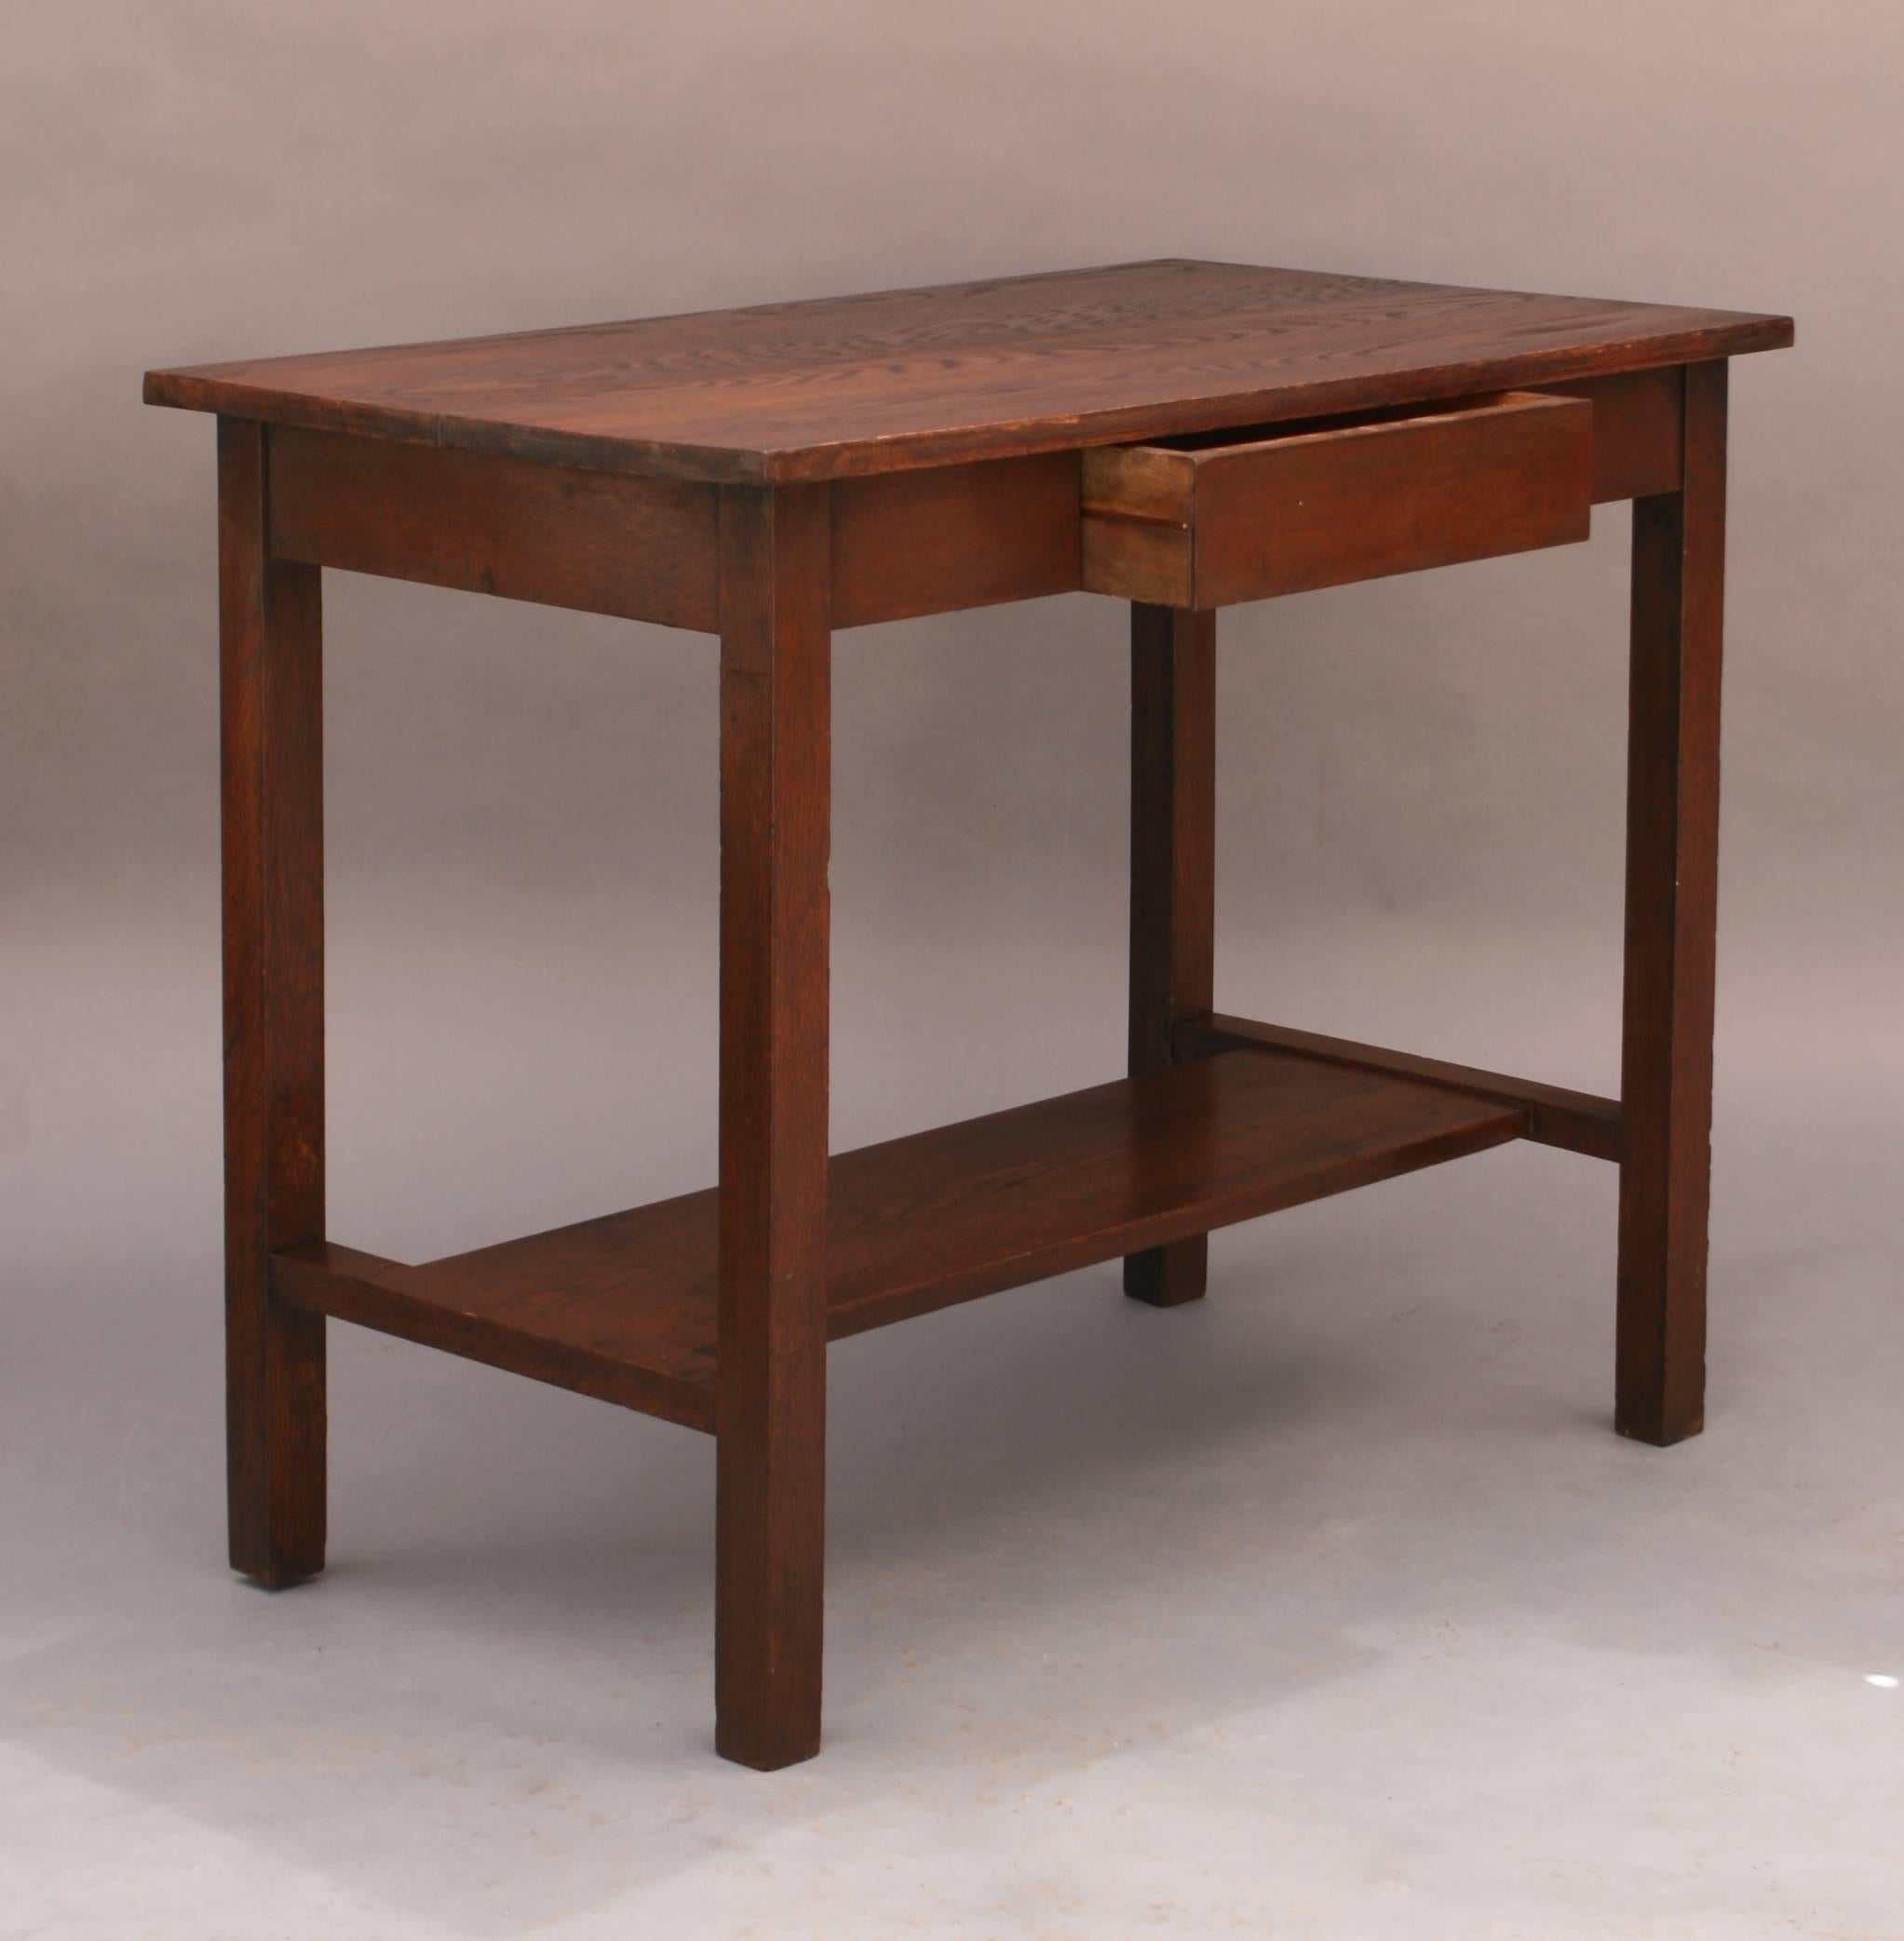 Arts & Crafts table/ desk with single drawer, circa 1910.